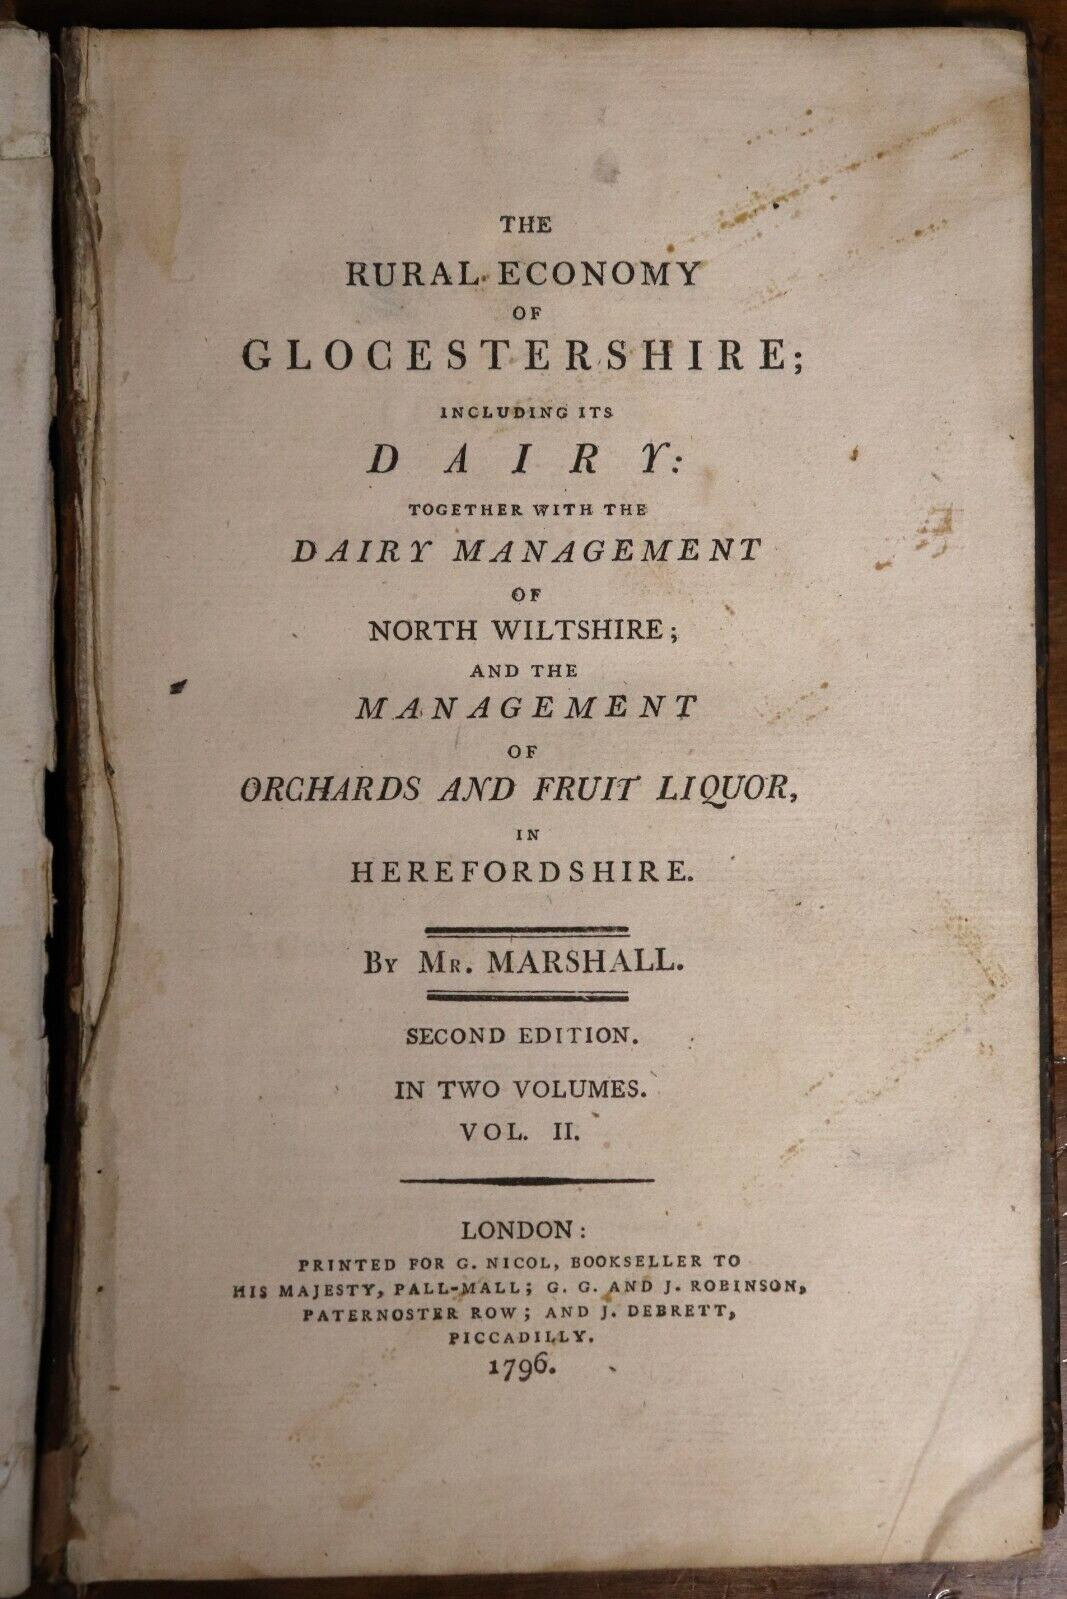 The Rural Economy of Glocestershire - 1796 - Antique British History Book - 0